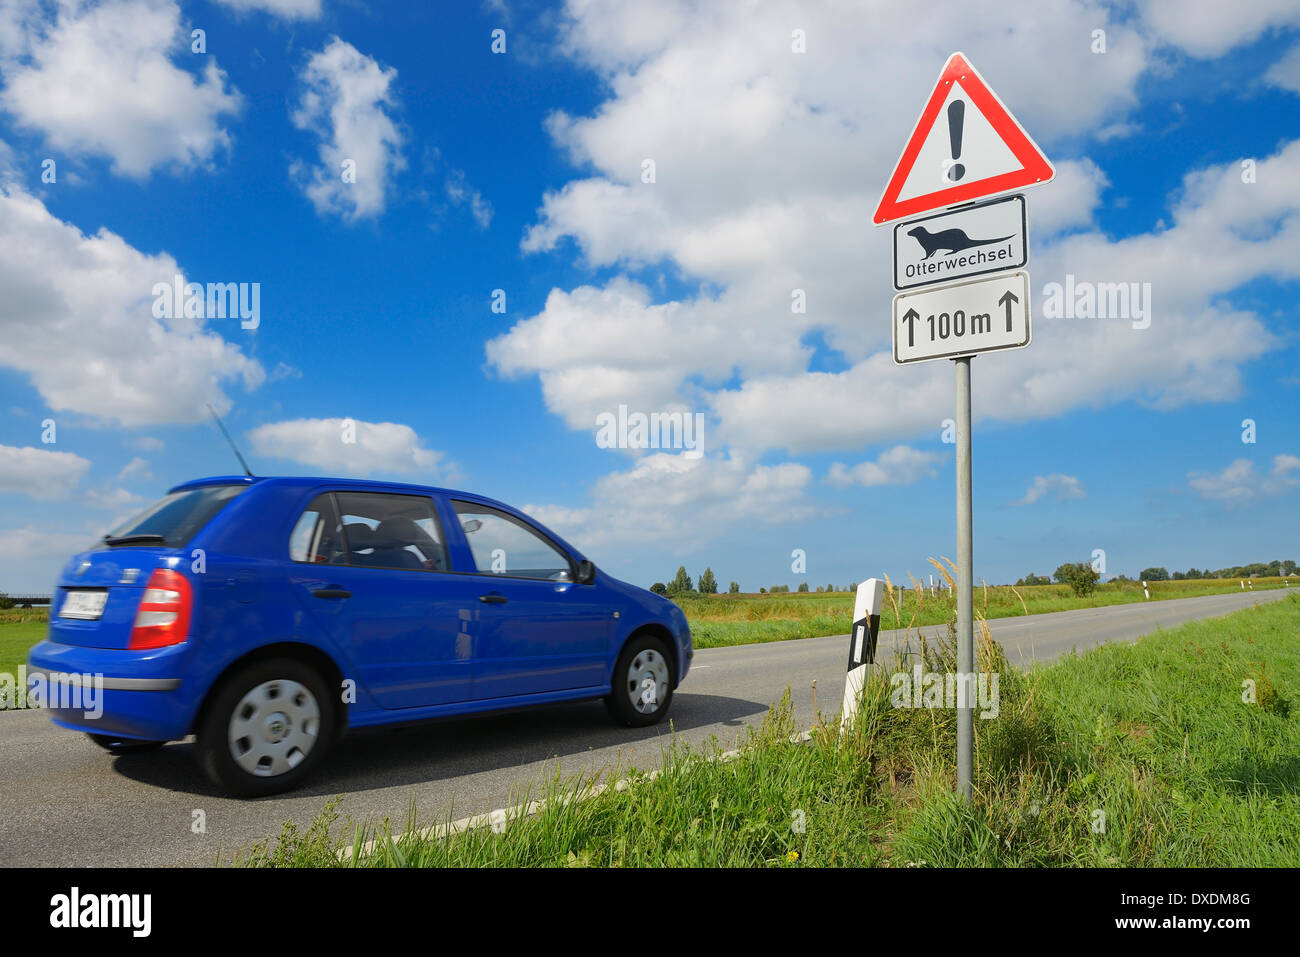 Car on Road and Otter Crossing Sign, Fischland-Darss-Zingst, Mecklenburg-Western Pomerania, Germany Stock Photo